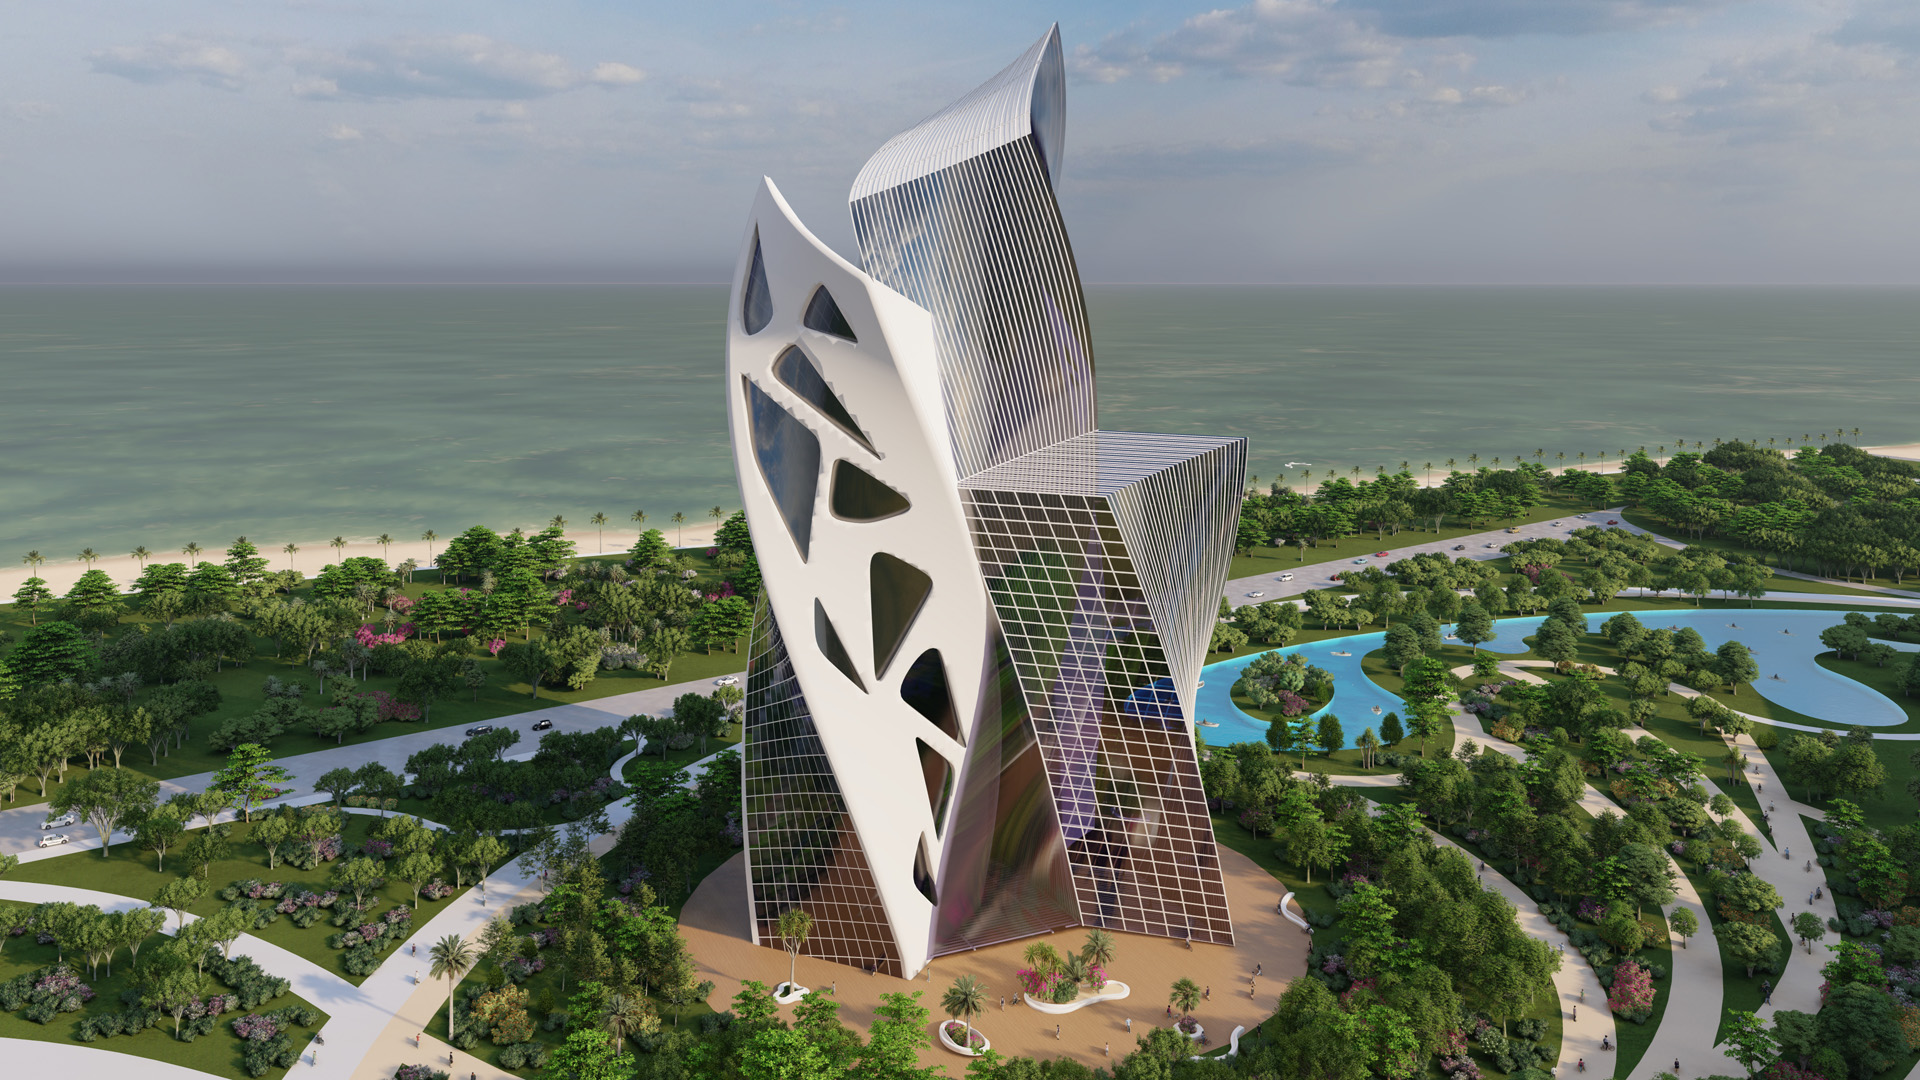 Biomimetic architecture: mixed-use tower